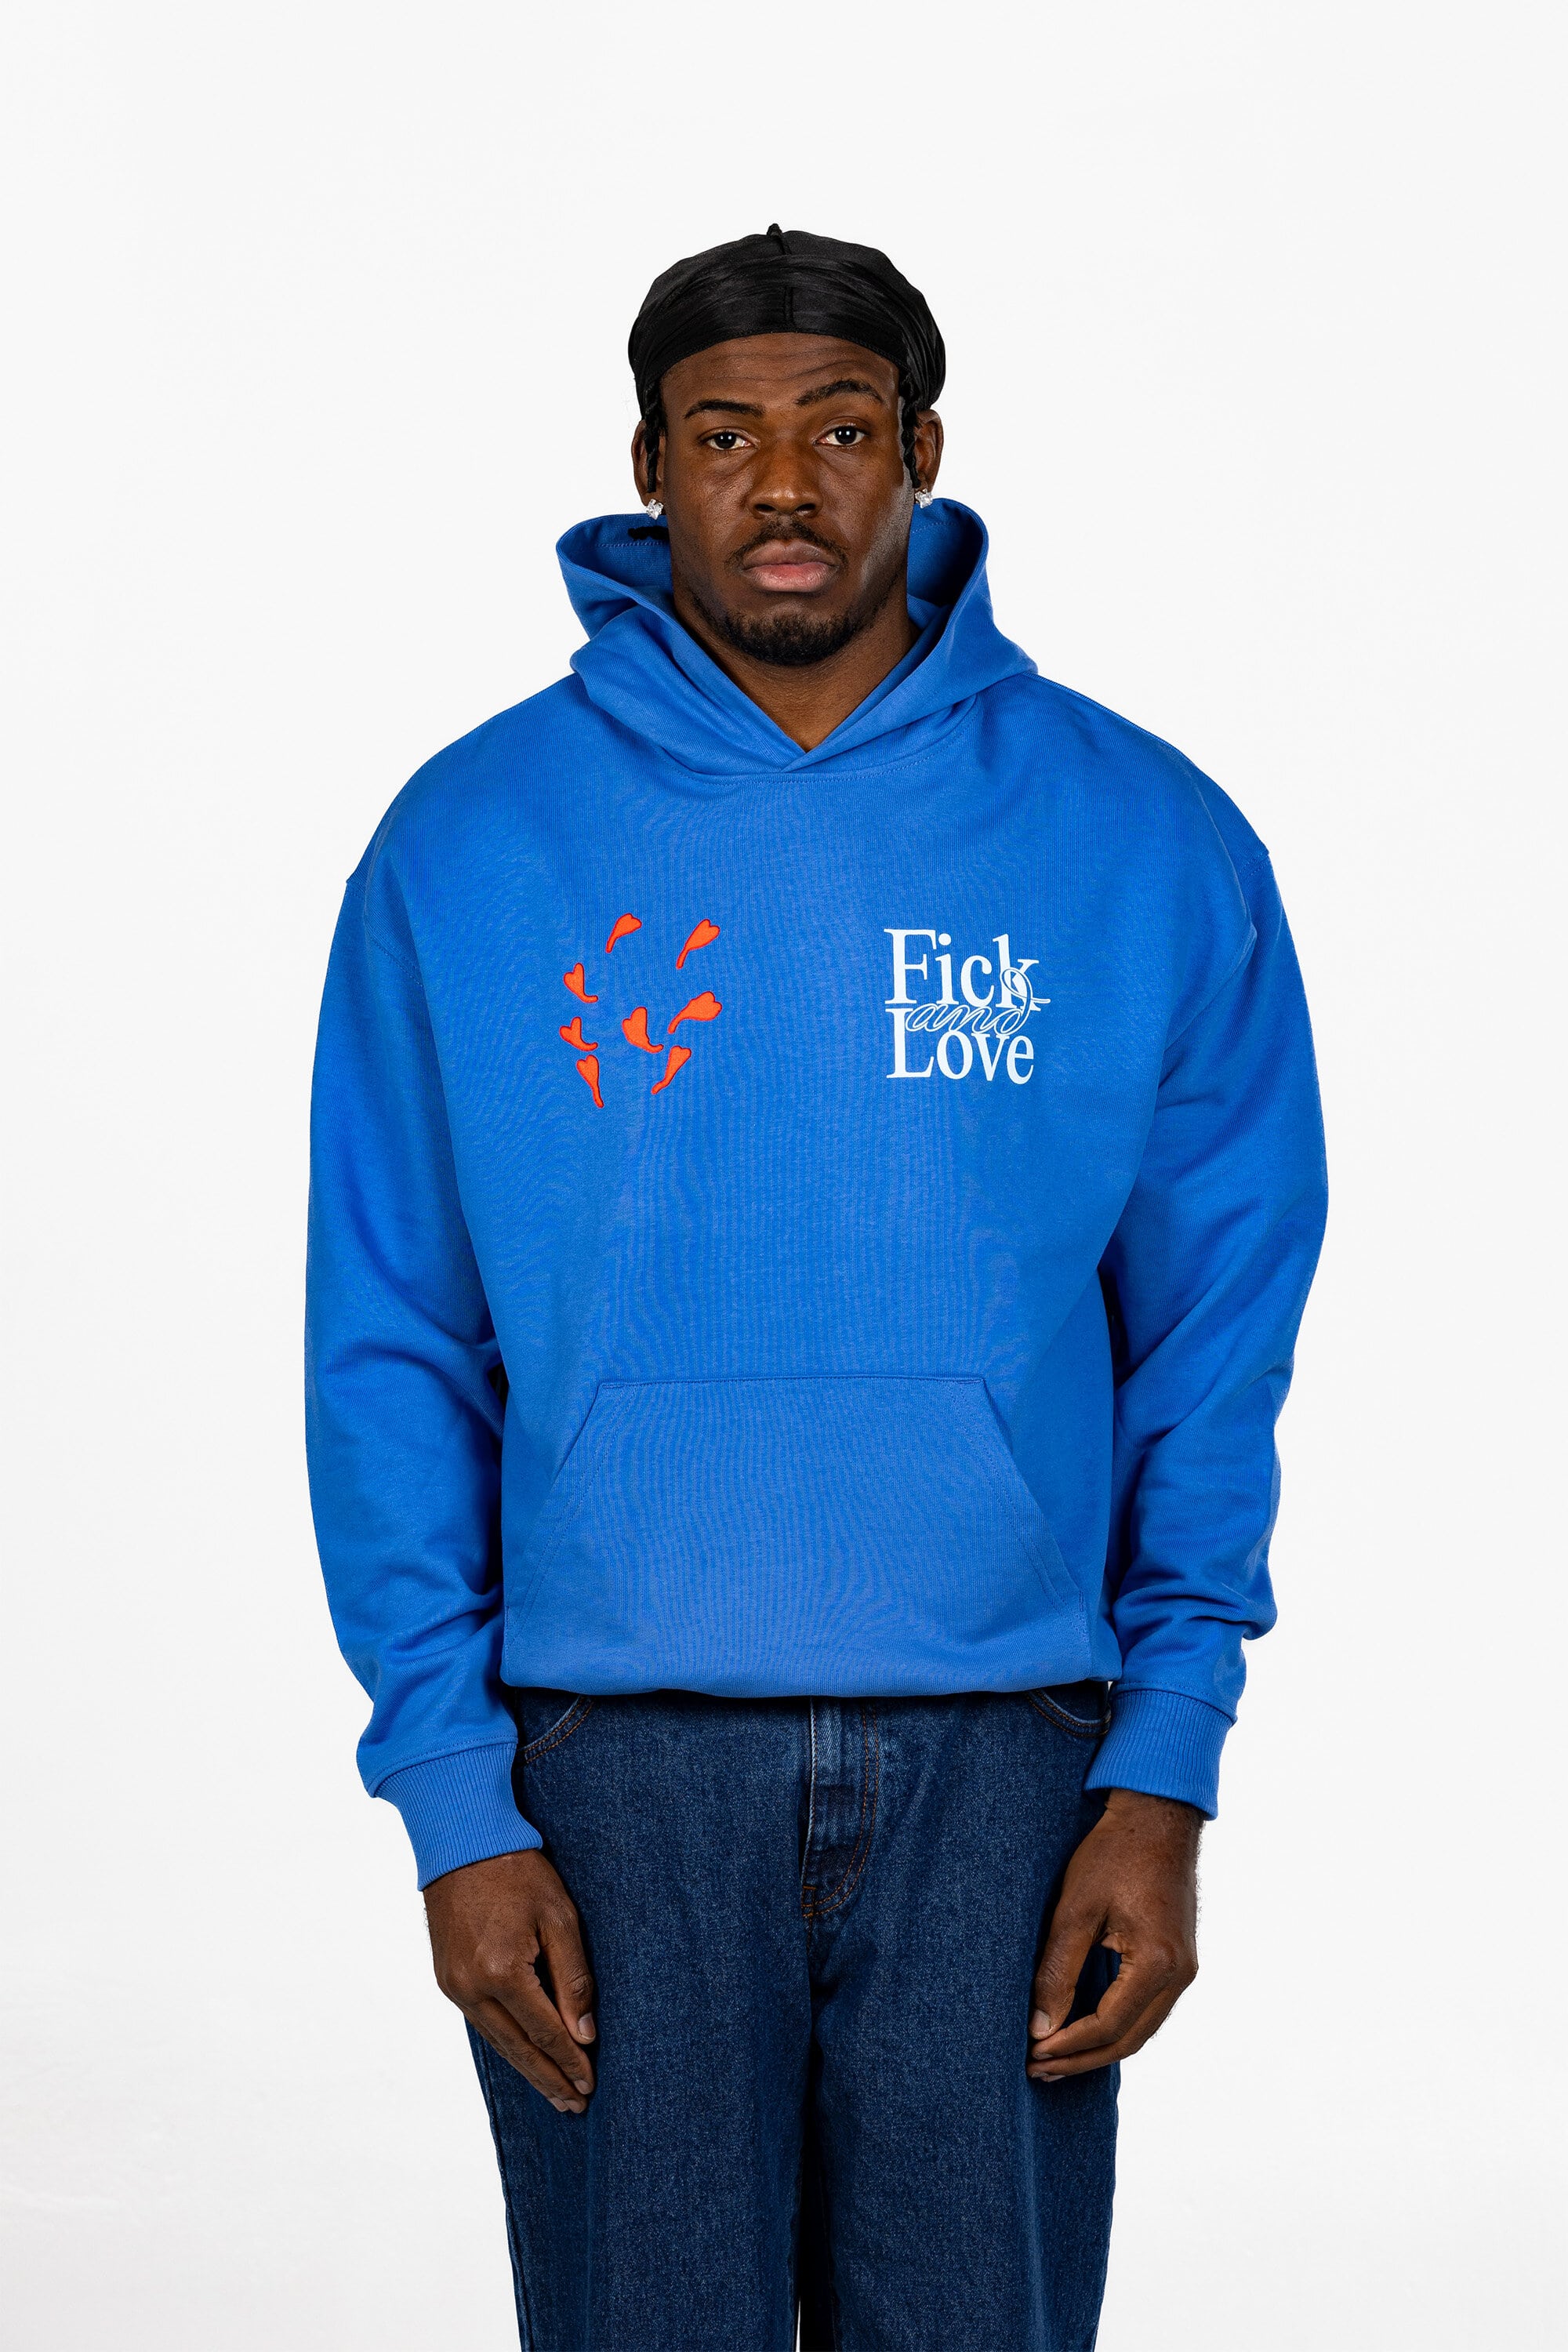 Hoodie Fick and Love Blue